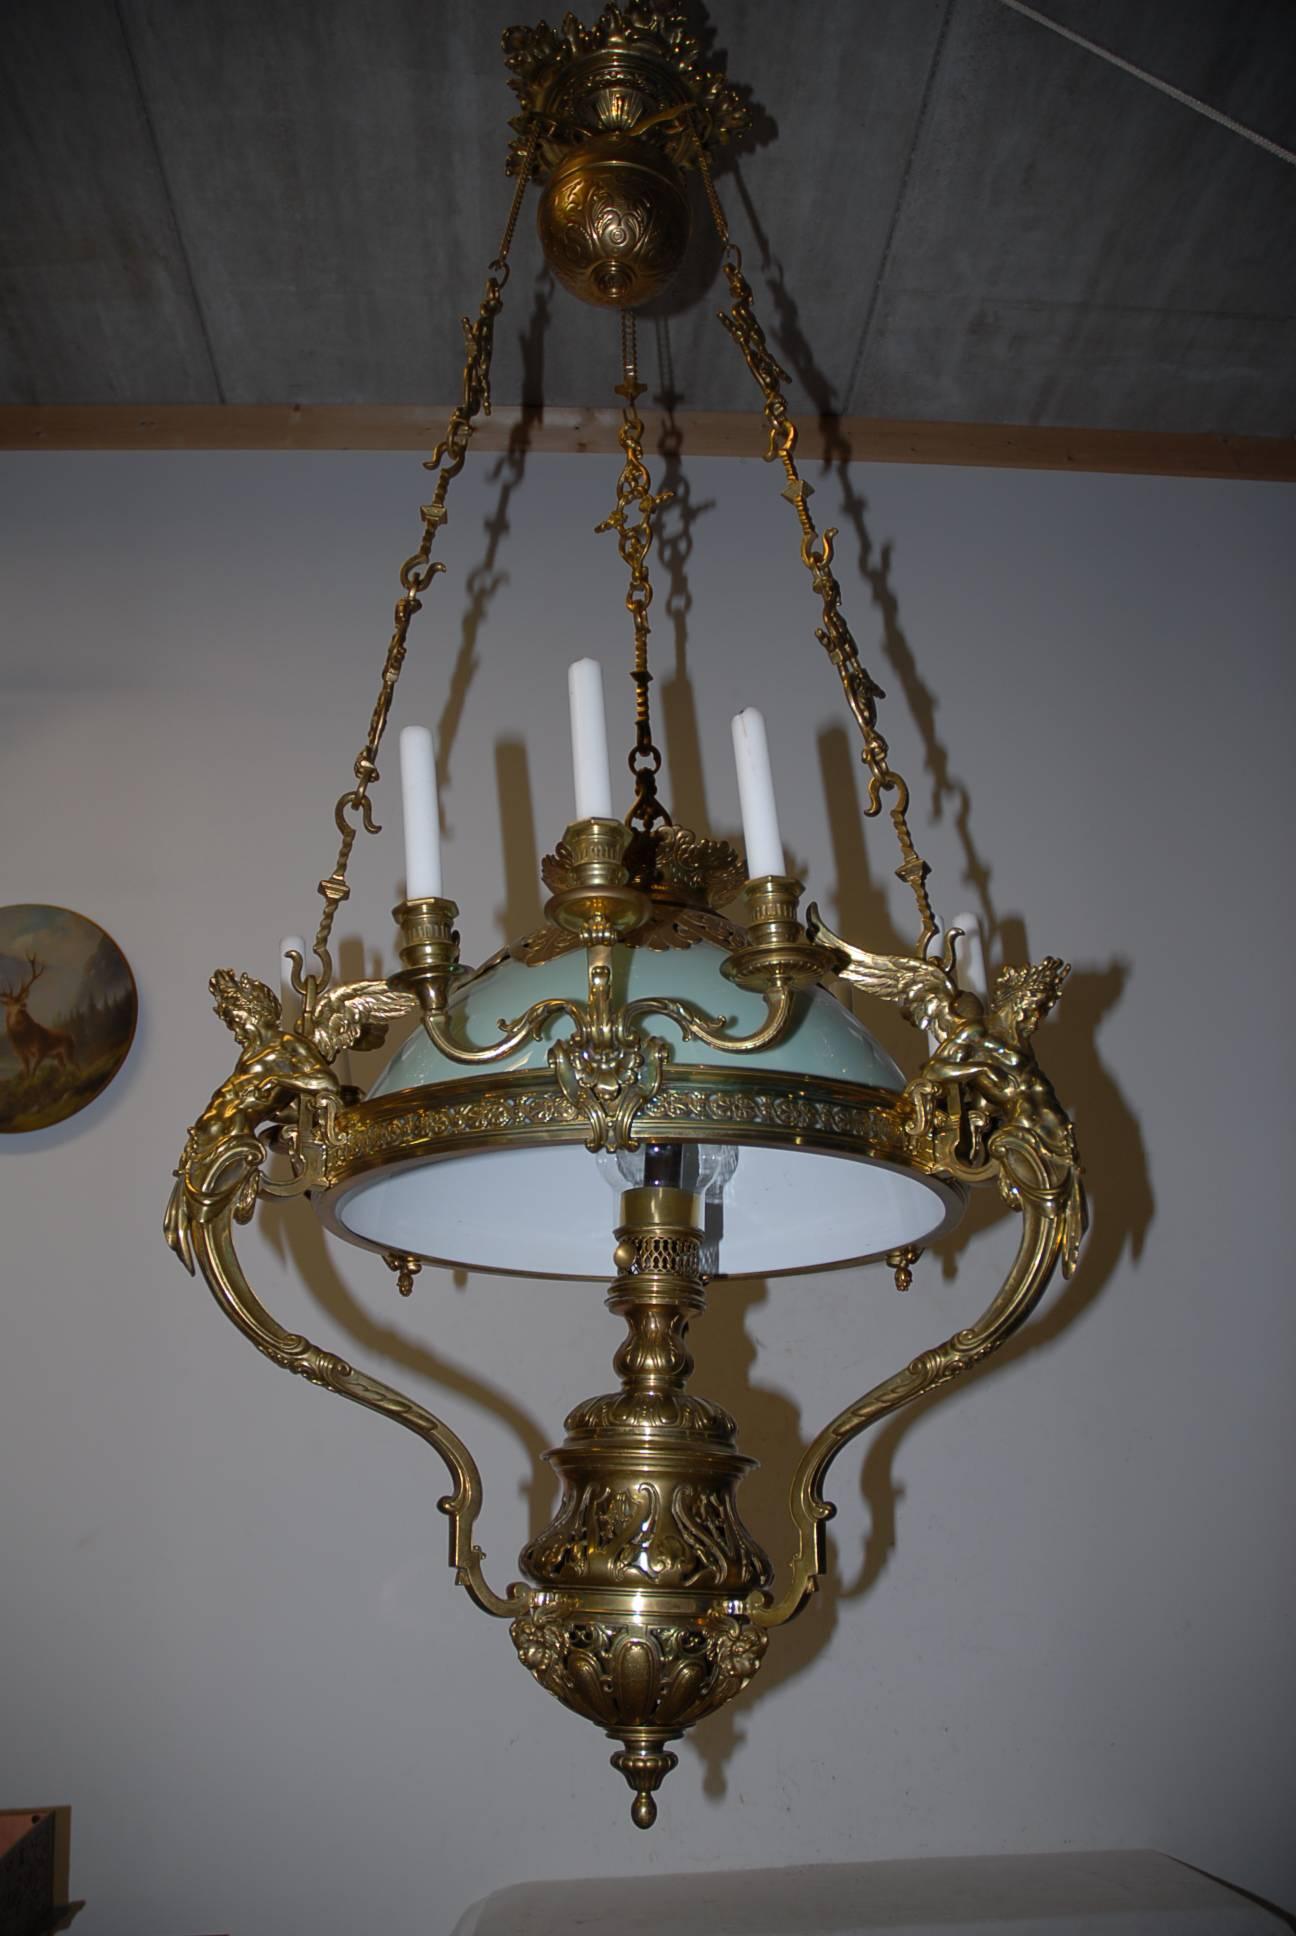 Neoclassical Revival Large French 19th Century Neoclassical Style Bronze Oil Lamp Pendant with Zeus